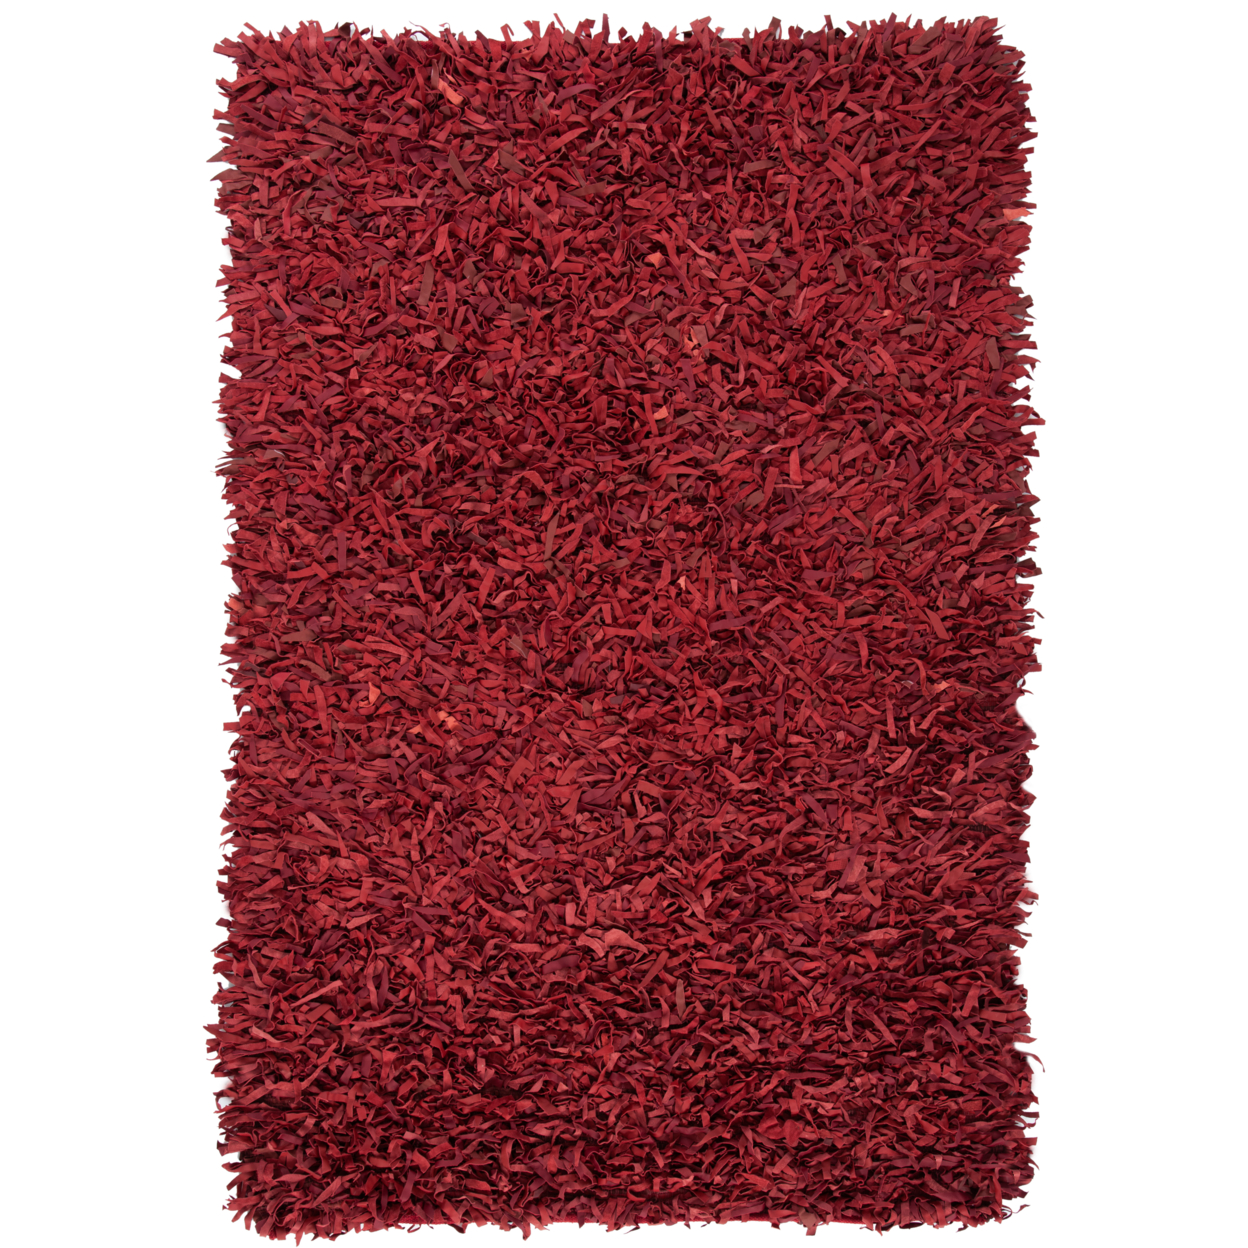 SAFAVIEH Leather Shag LSG601D Hand-knotted Red Rug - 4' X 6'